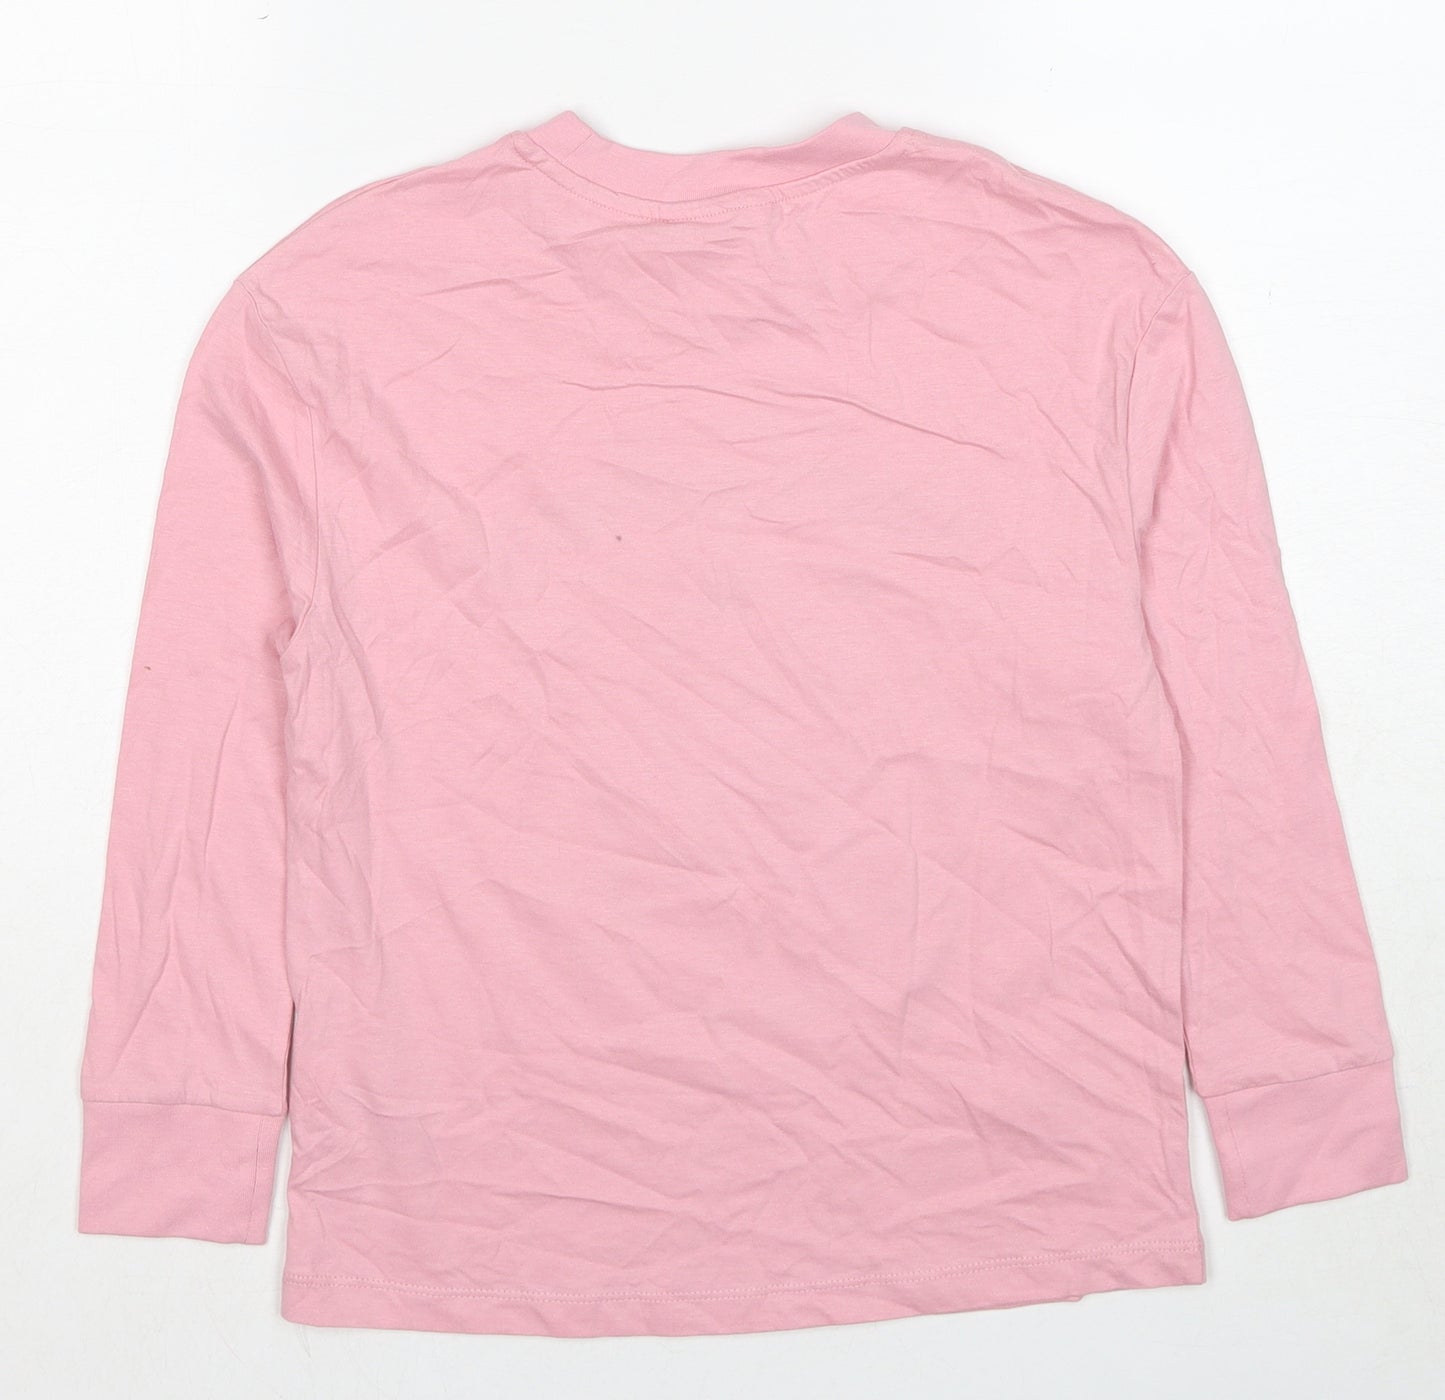 Marks and Spencer Girls Pink Cotton Basic T-Shirt Size 10-11 Years Round Neck Pullover - All Aboard The Disco Express Santa Claus